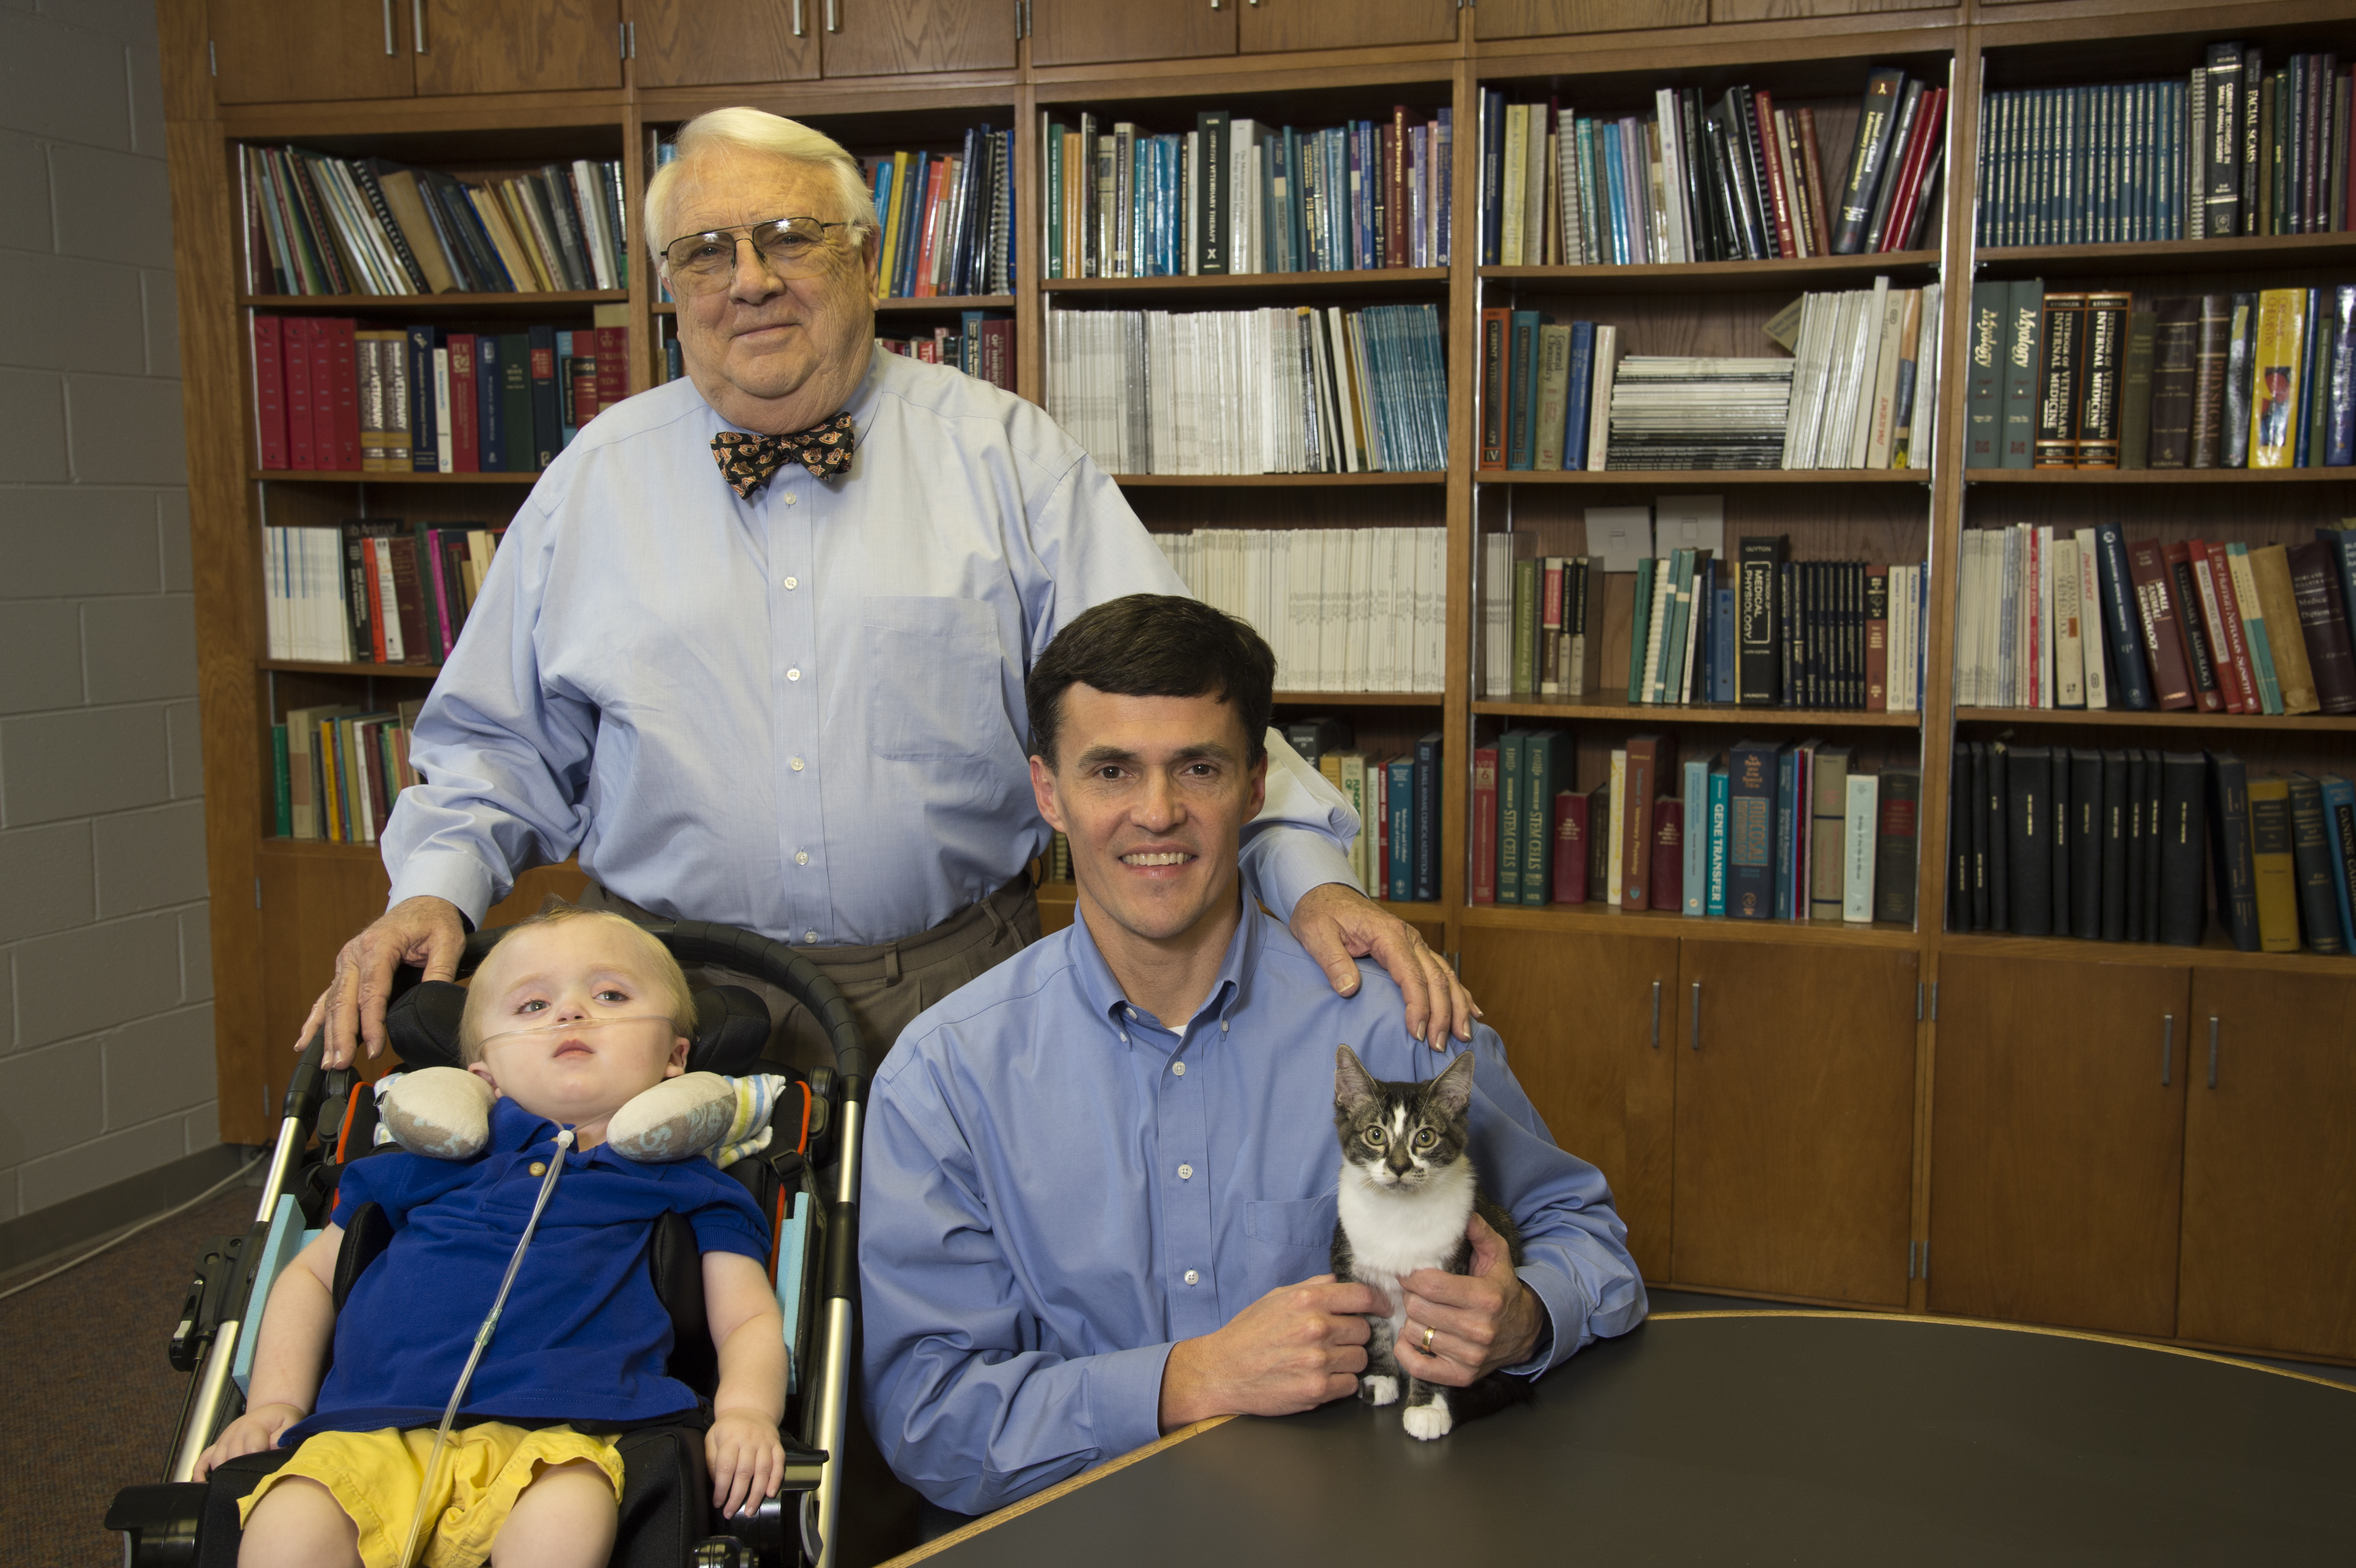 Dr. Henry Baker, standing, director emeritus of the Scott-Ritchey Research Center who played a pivotal role in early GM1 research, with Porter Heatherly, Dr. Doug Martin and one of the GM1 cats.